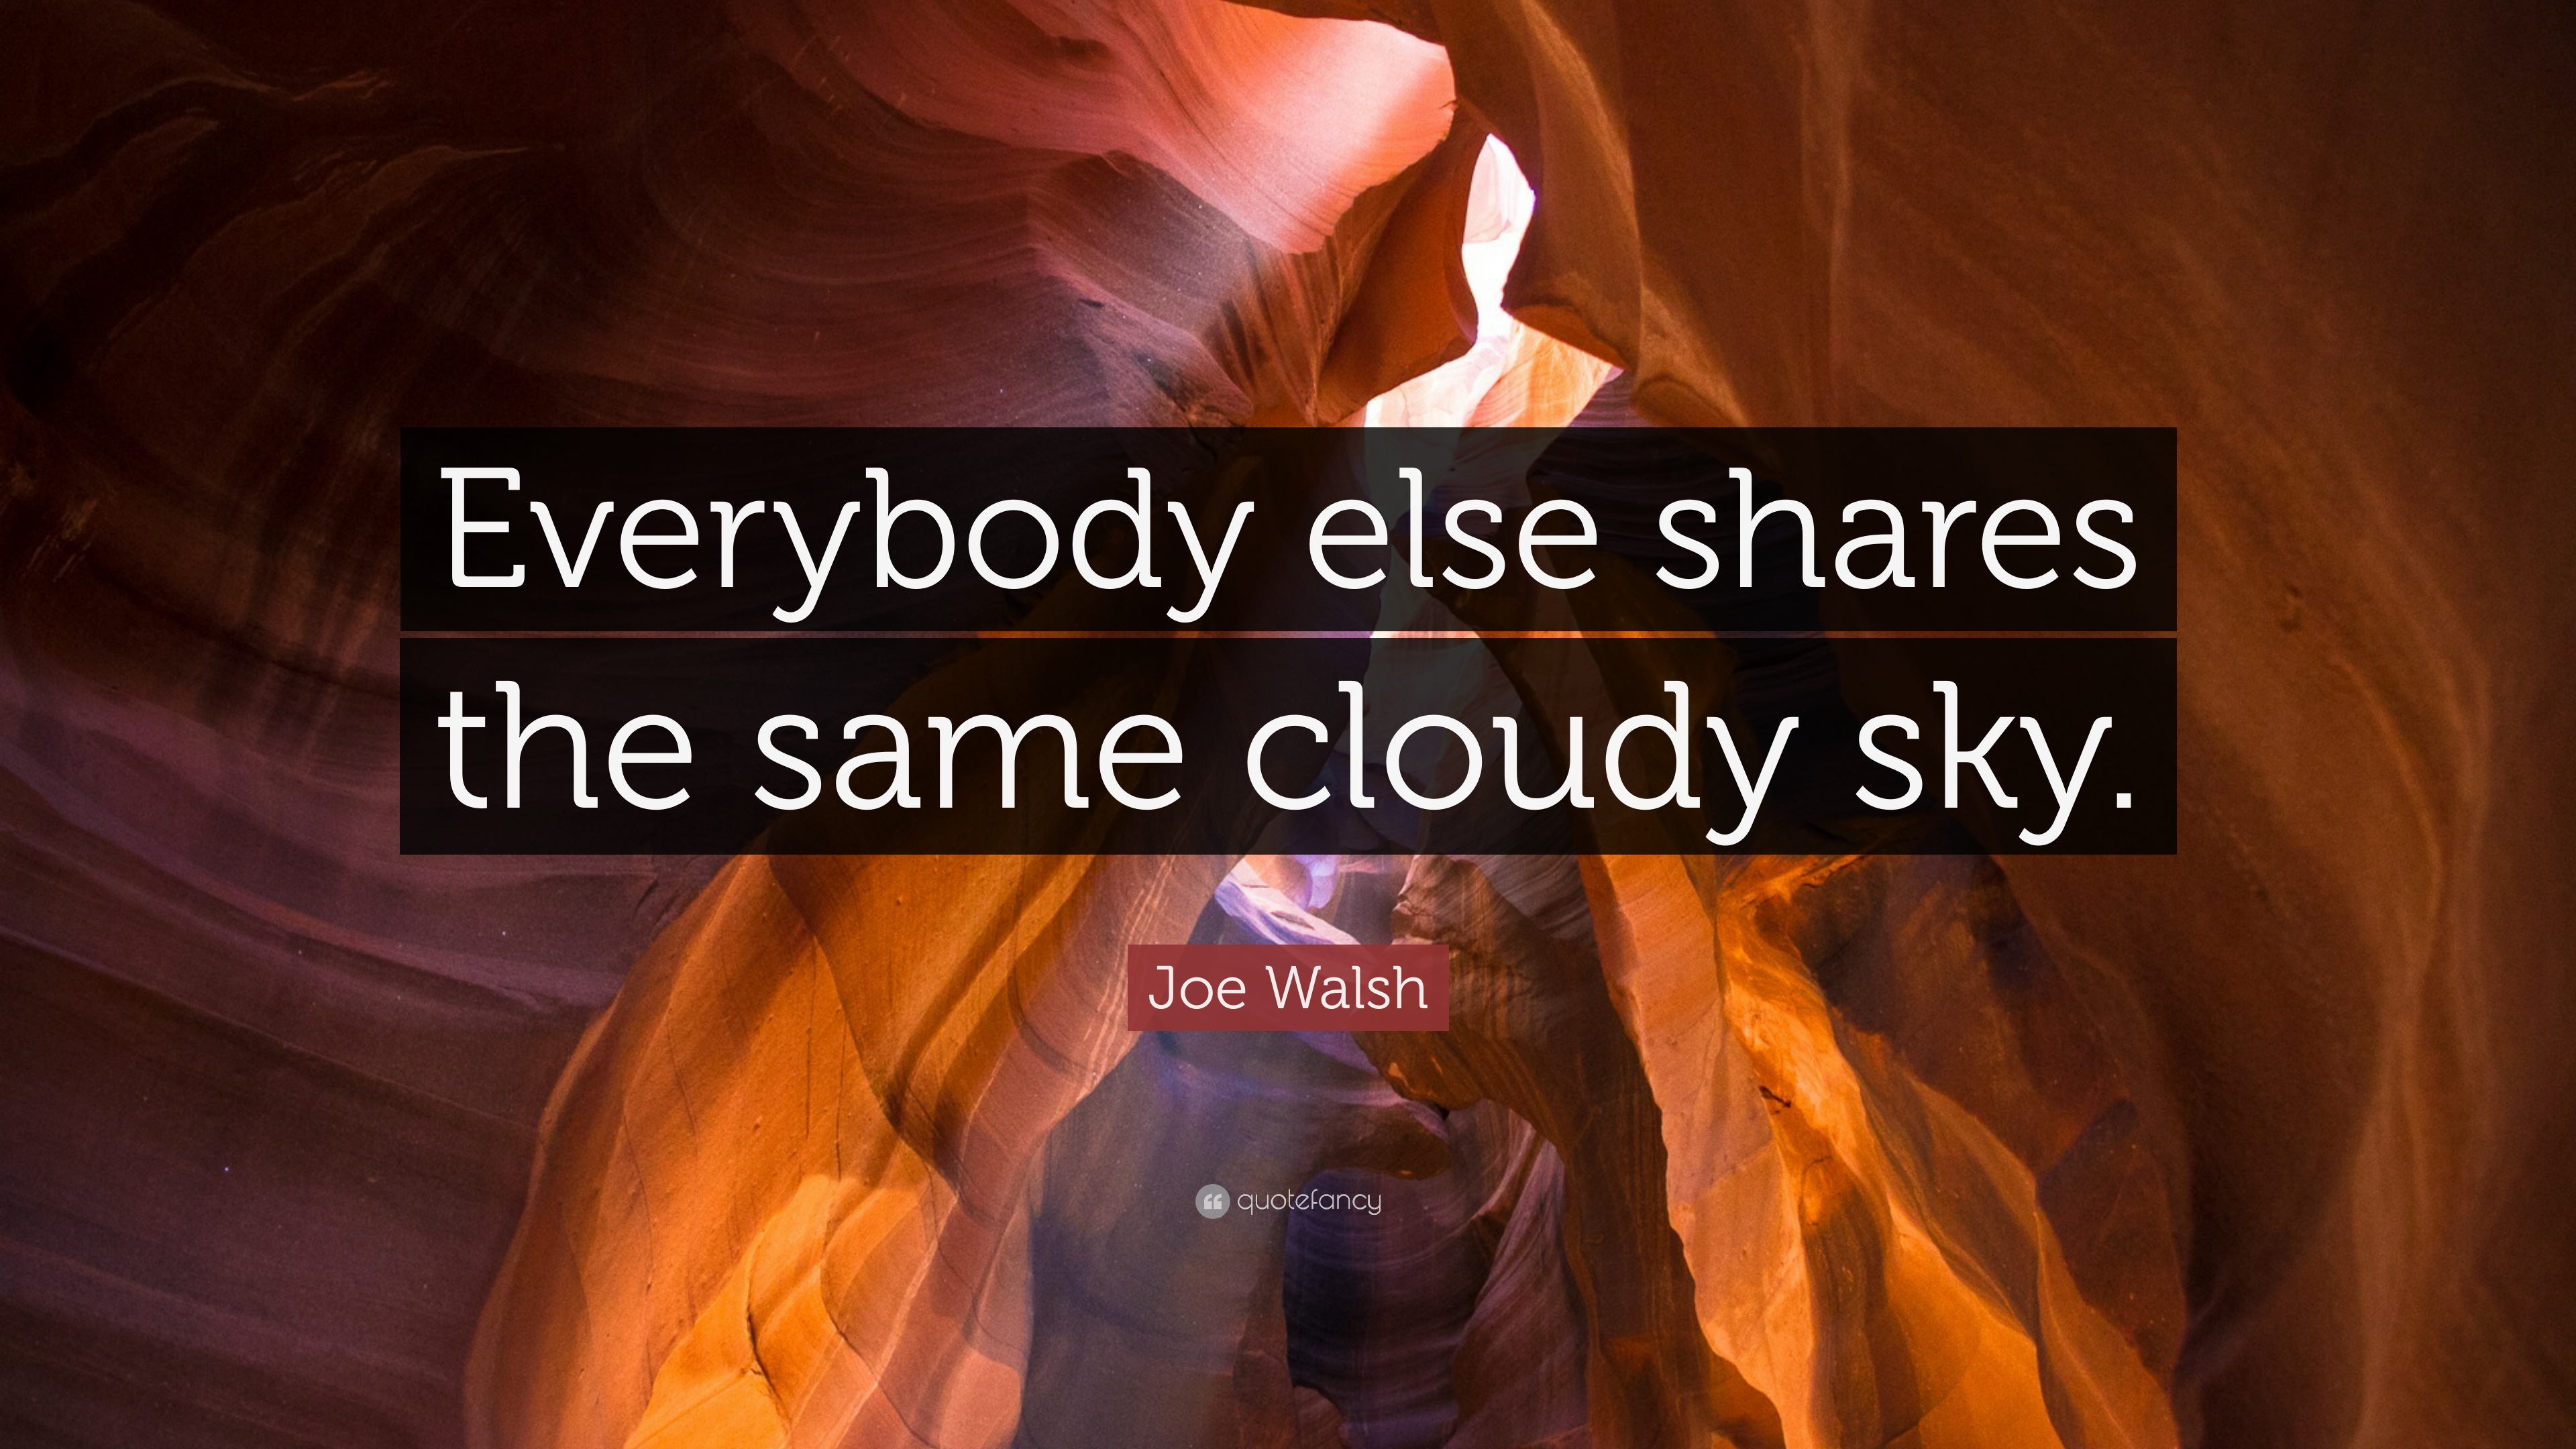 Joe Walsh Quote: “Everybody else shares the same cloudy sky.” 7